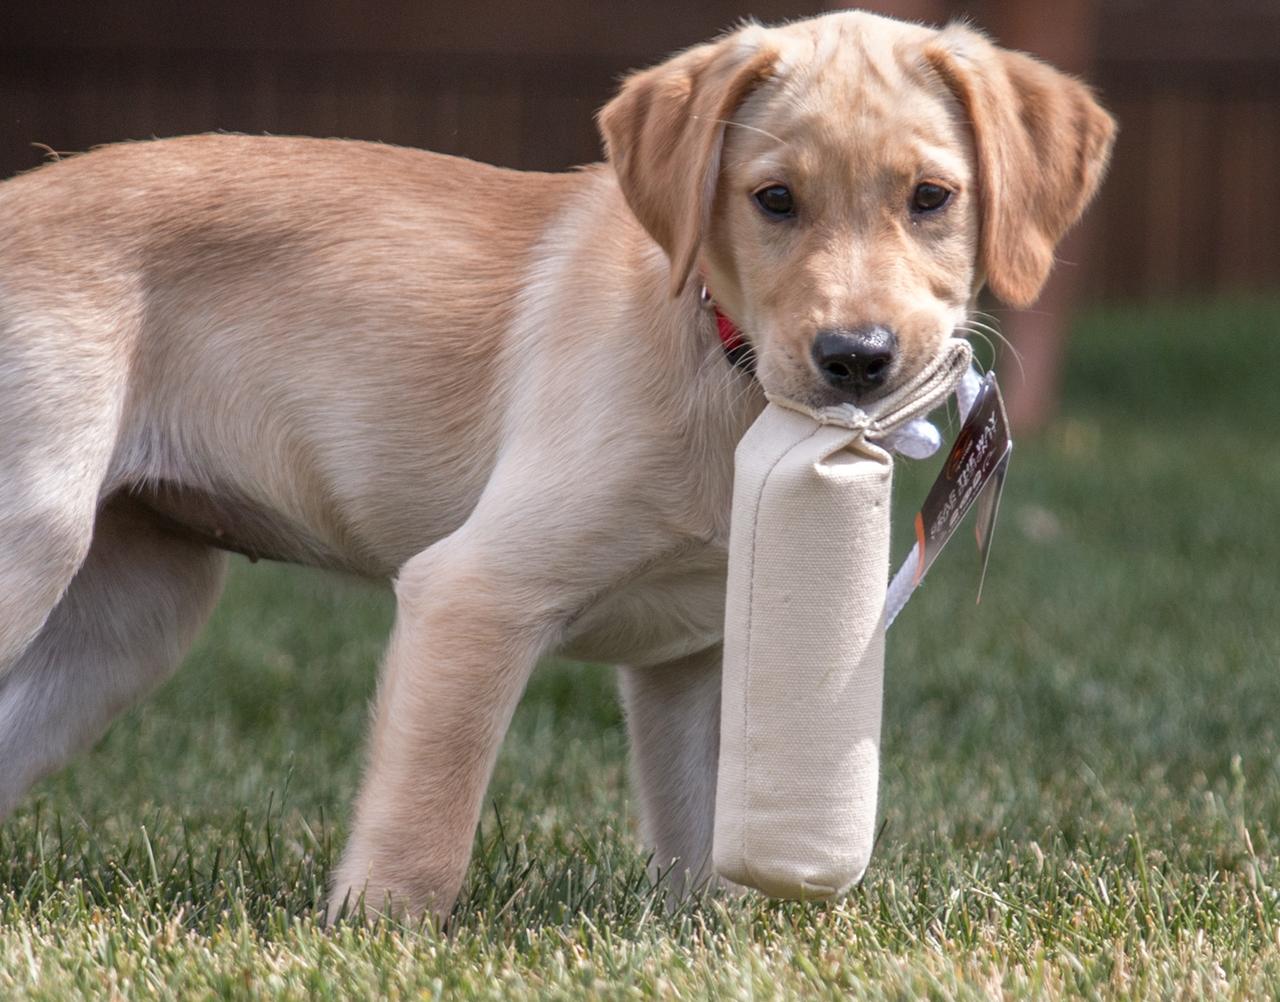 Yellow Lab puppy holding puppy dummy retrieving tool in mouth.